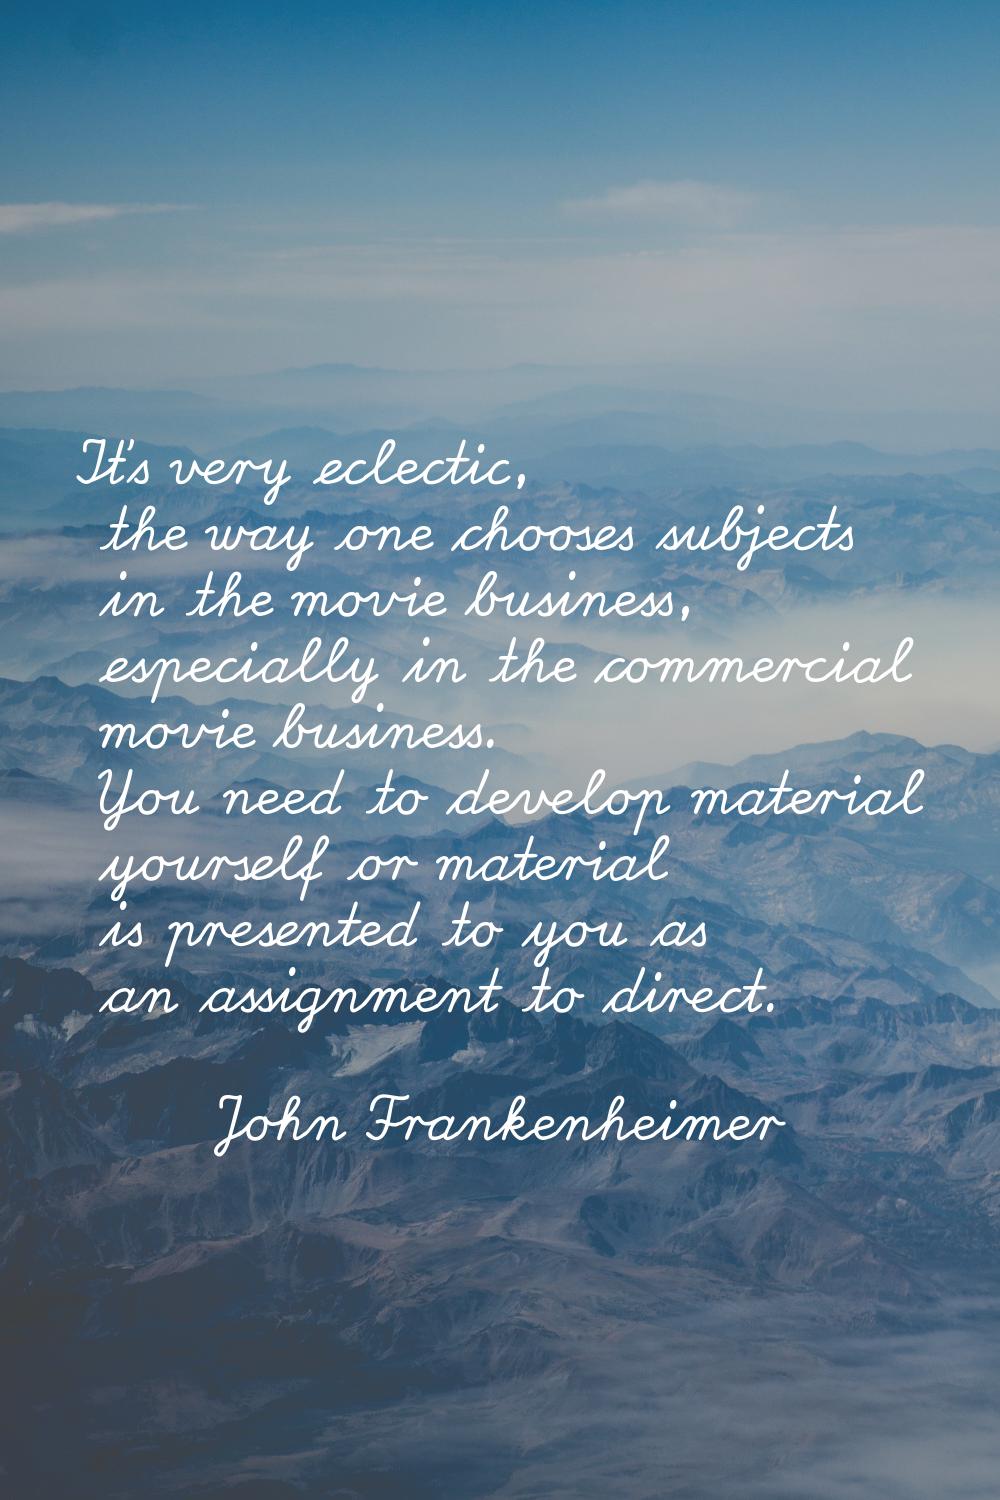 It's very eclectic, the way one chooses subjects in the movie business, especially in the commercia